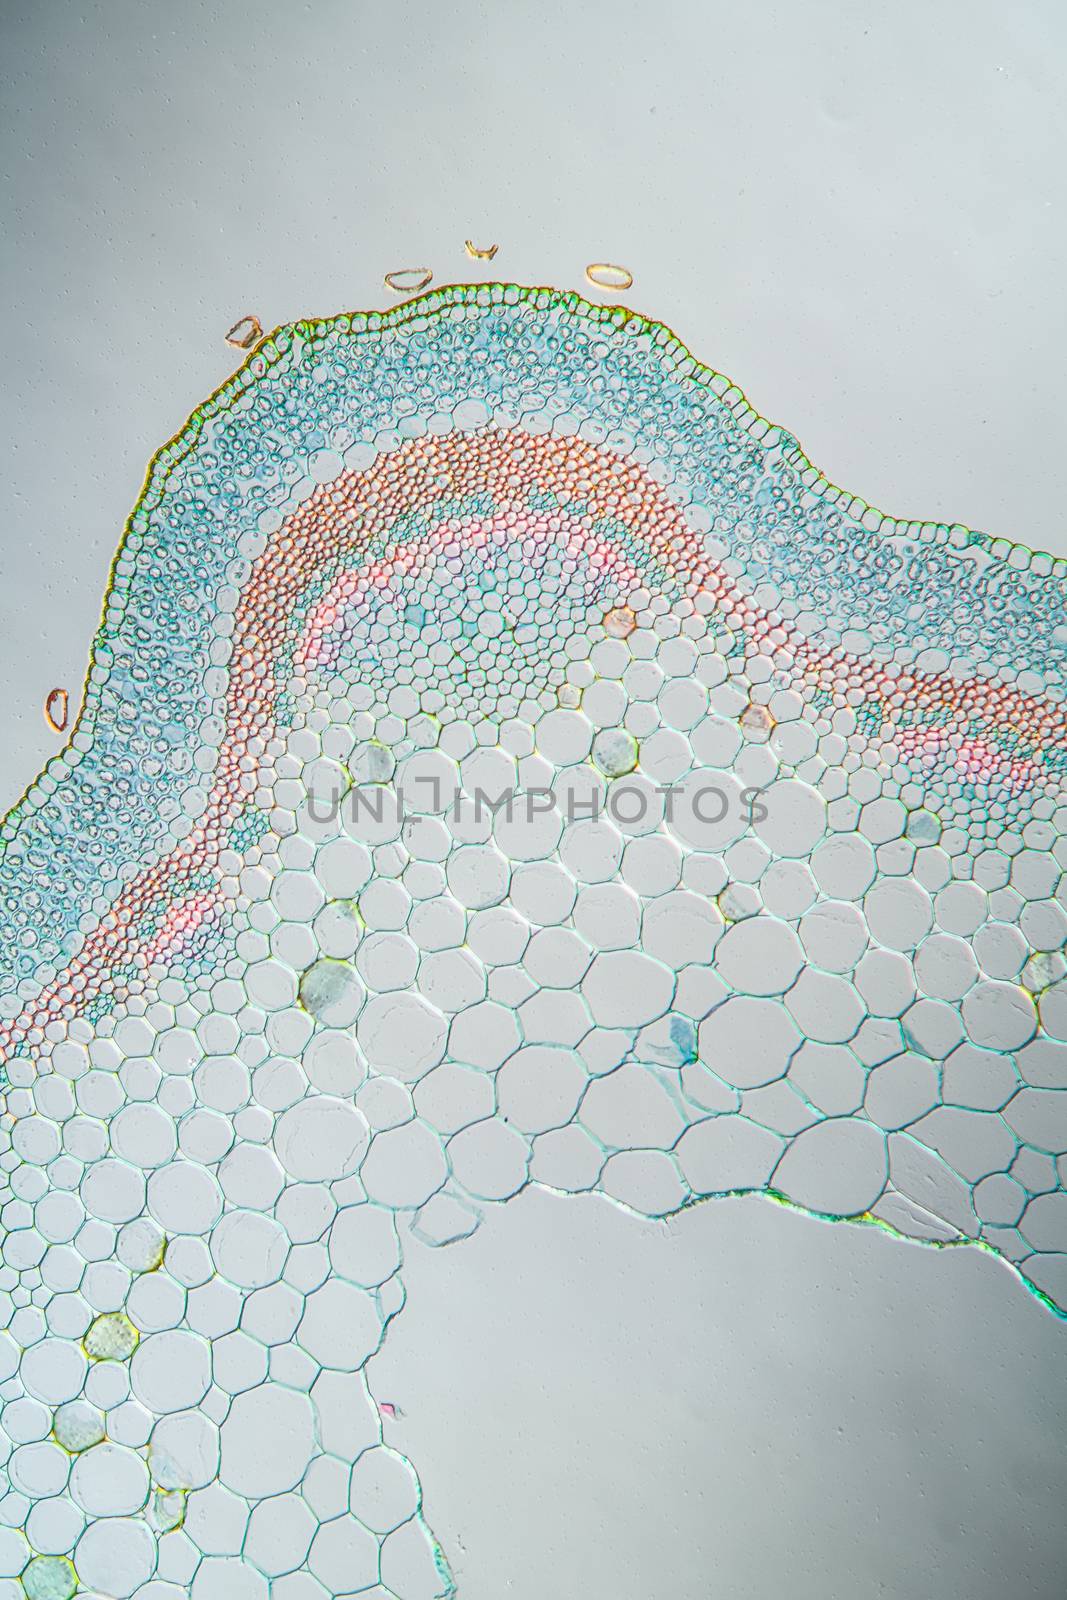 Ribwort stalk in cross section 100x by Dr-Lange